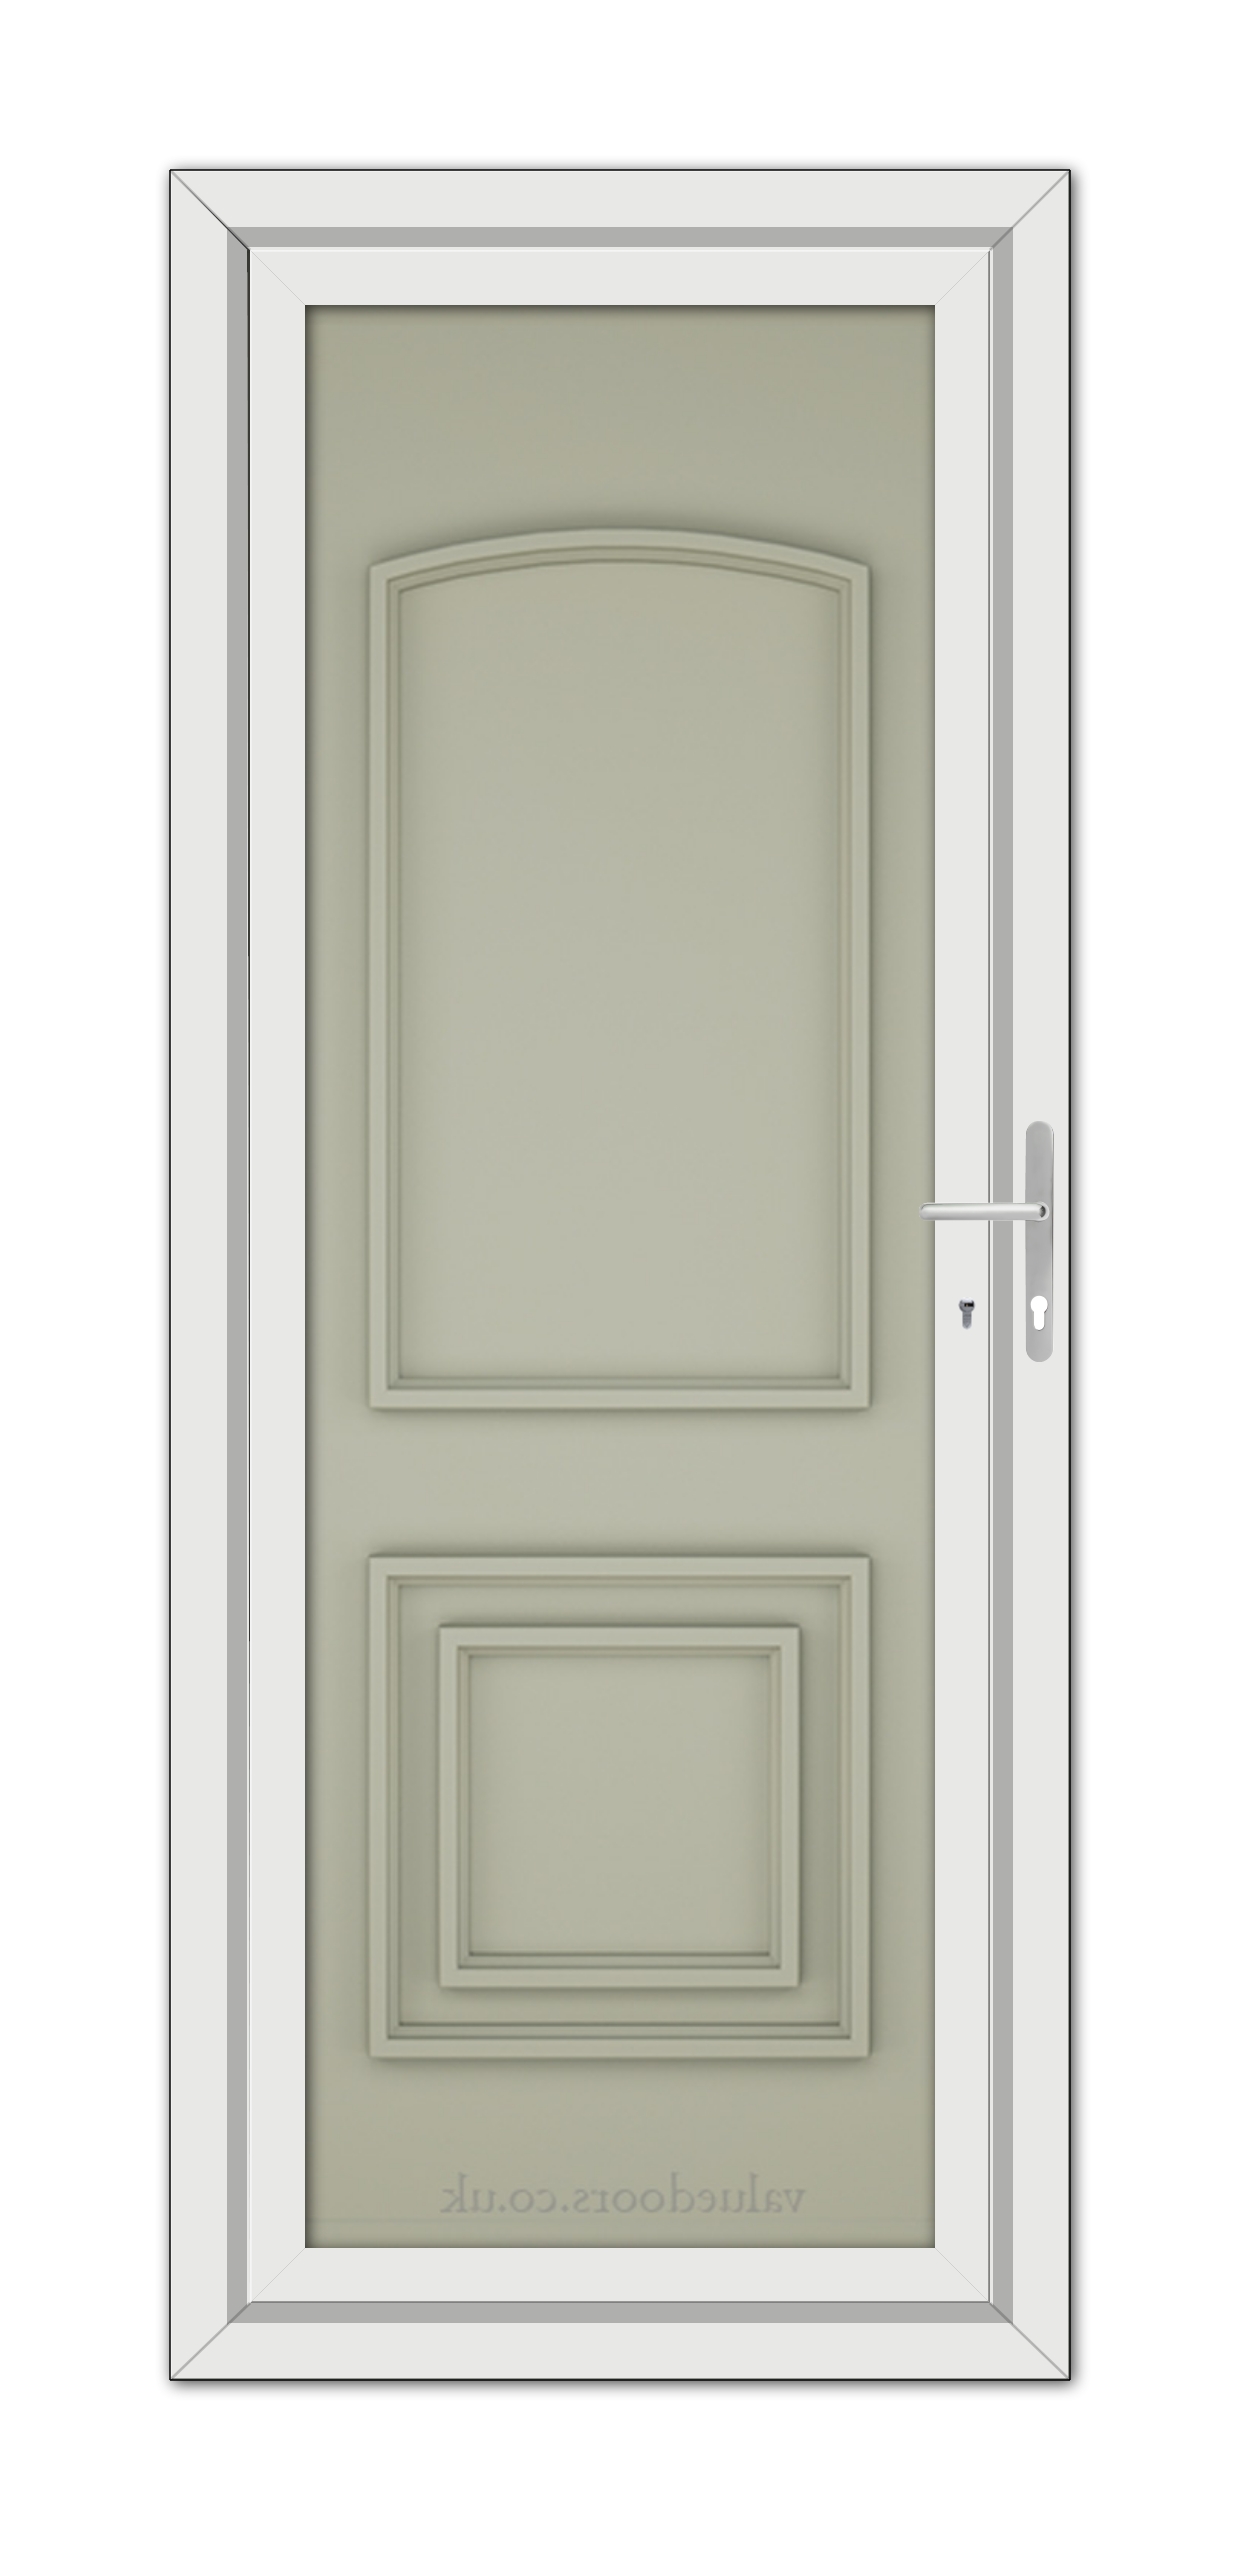 An upright closed Agate Grey Balmoral Classic Solid uPVC door with a white frame, featuring an upper arched panel and a lower rectangular panel, and equipped with a metal handle.